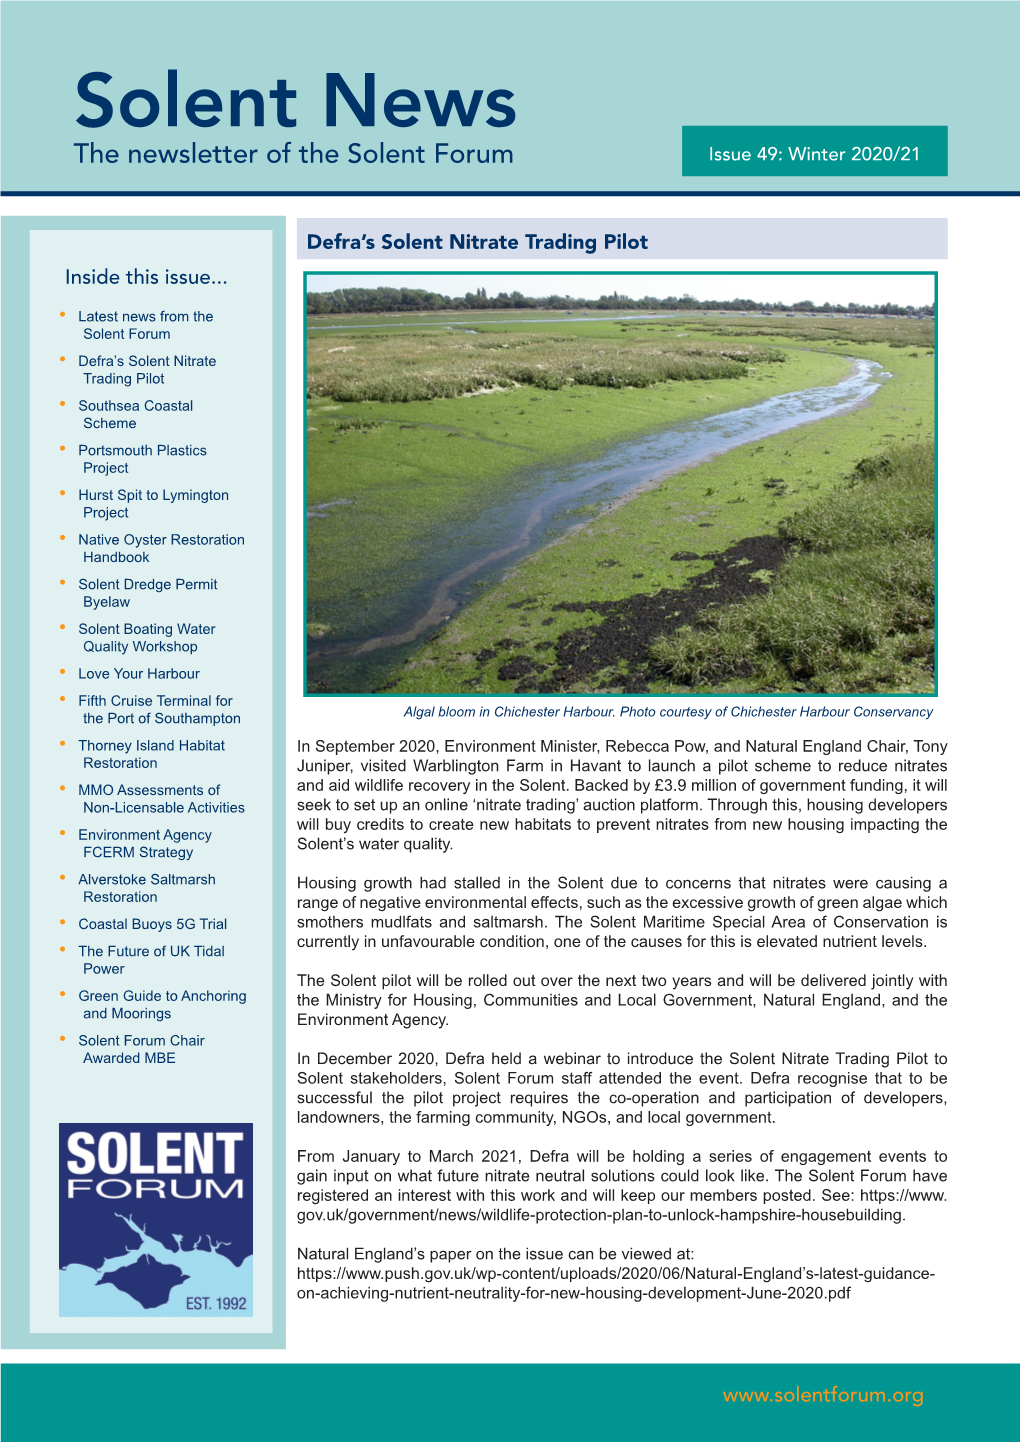 Solent News the Newsletter of the Solent Forum Issue 49: Winter 2020/21